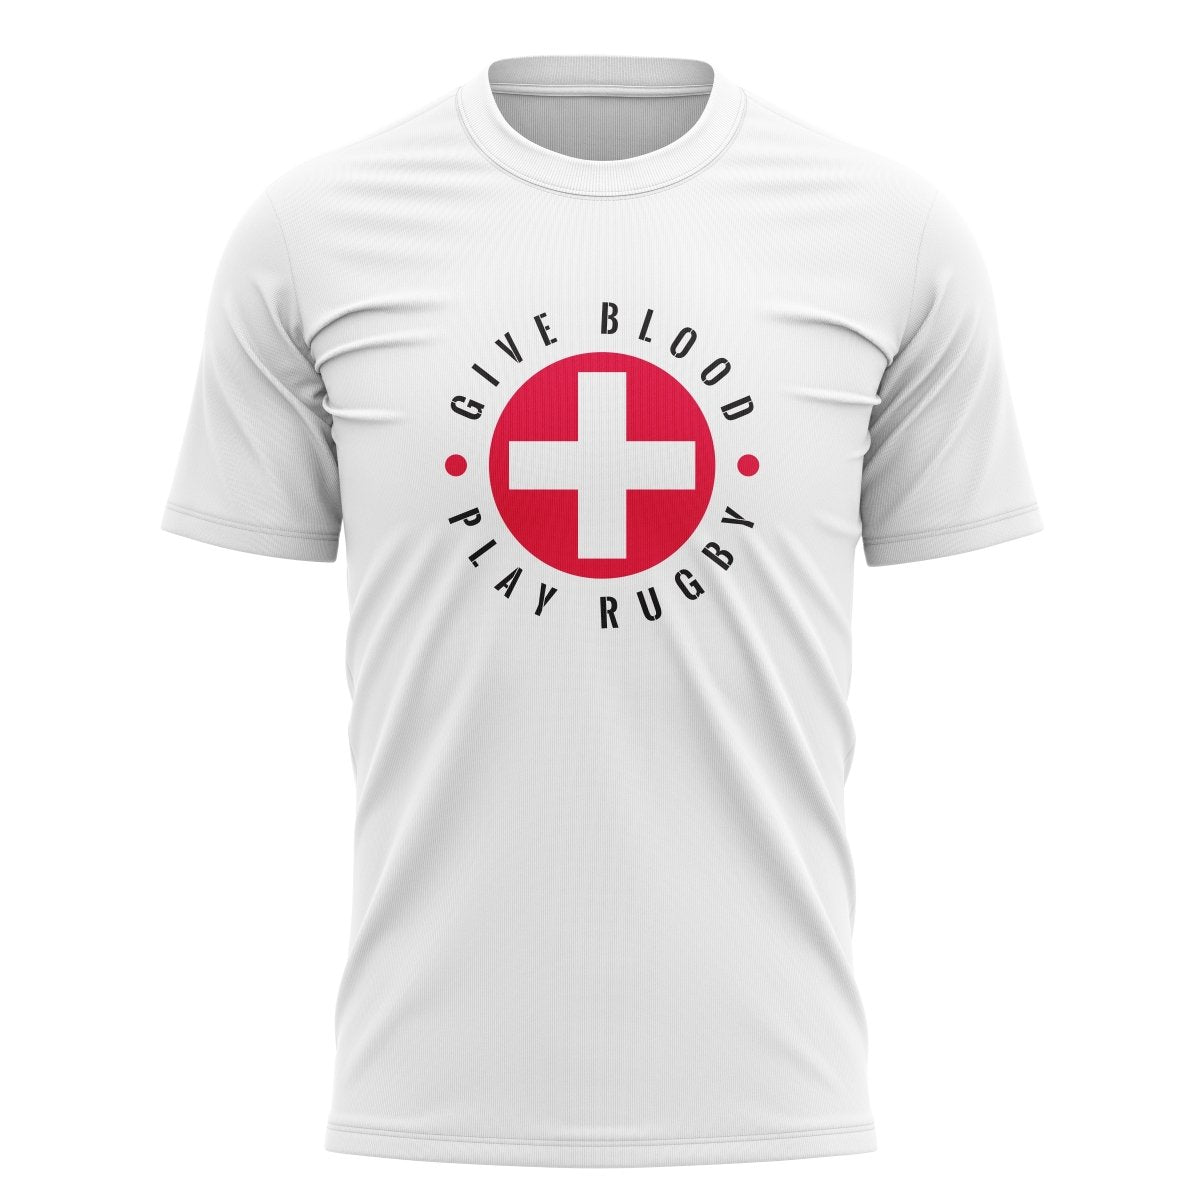 Give Blood PLAy Rugby Graphic Tee - www.therugbyshop.com www.therugbyshop.com MEN&#39;S / WHITE / S XIX Brands TEES Give Blood PLAy Rugby Graphic Tee